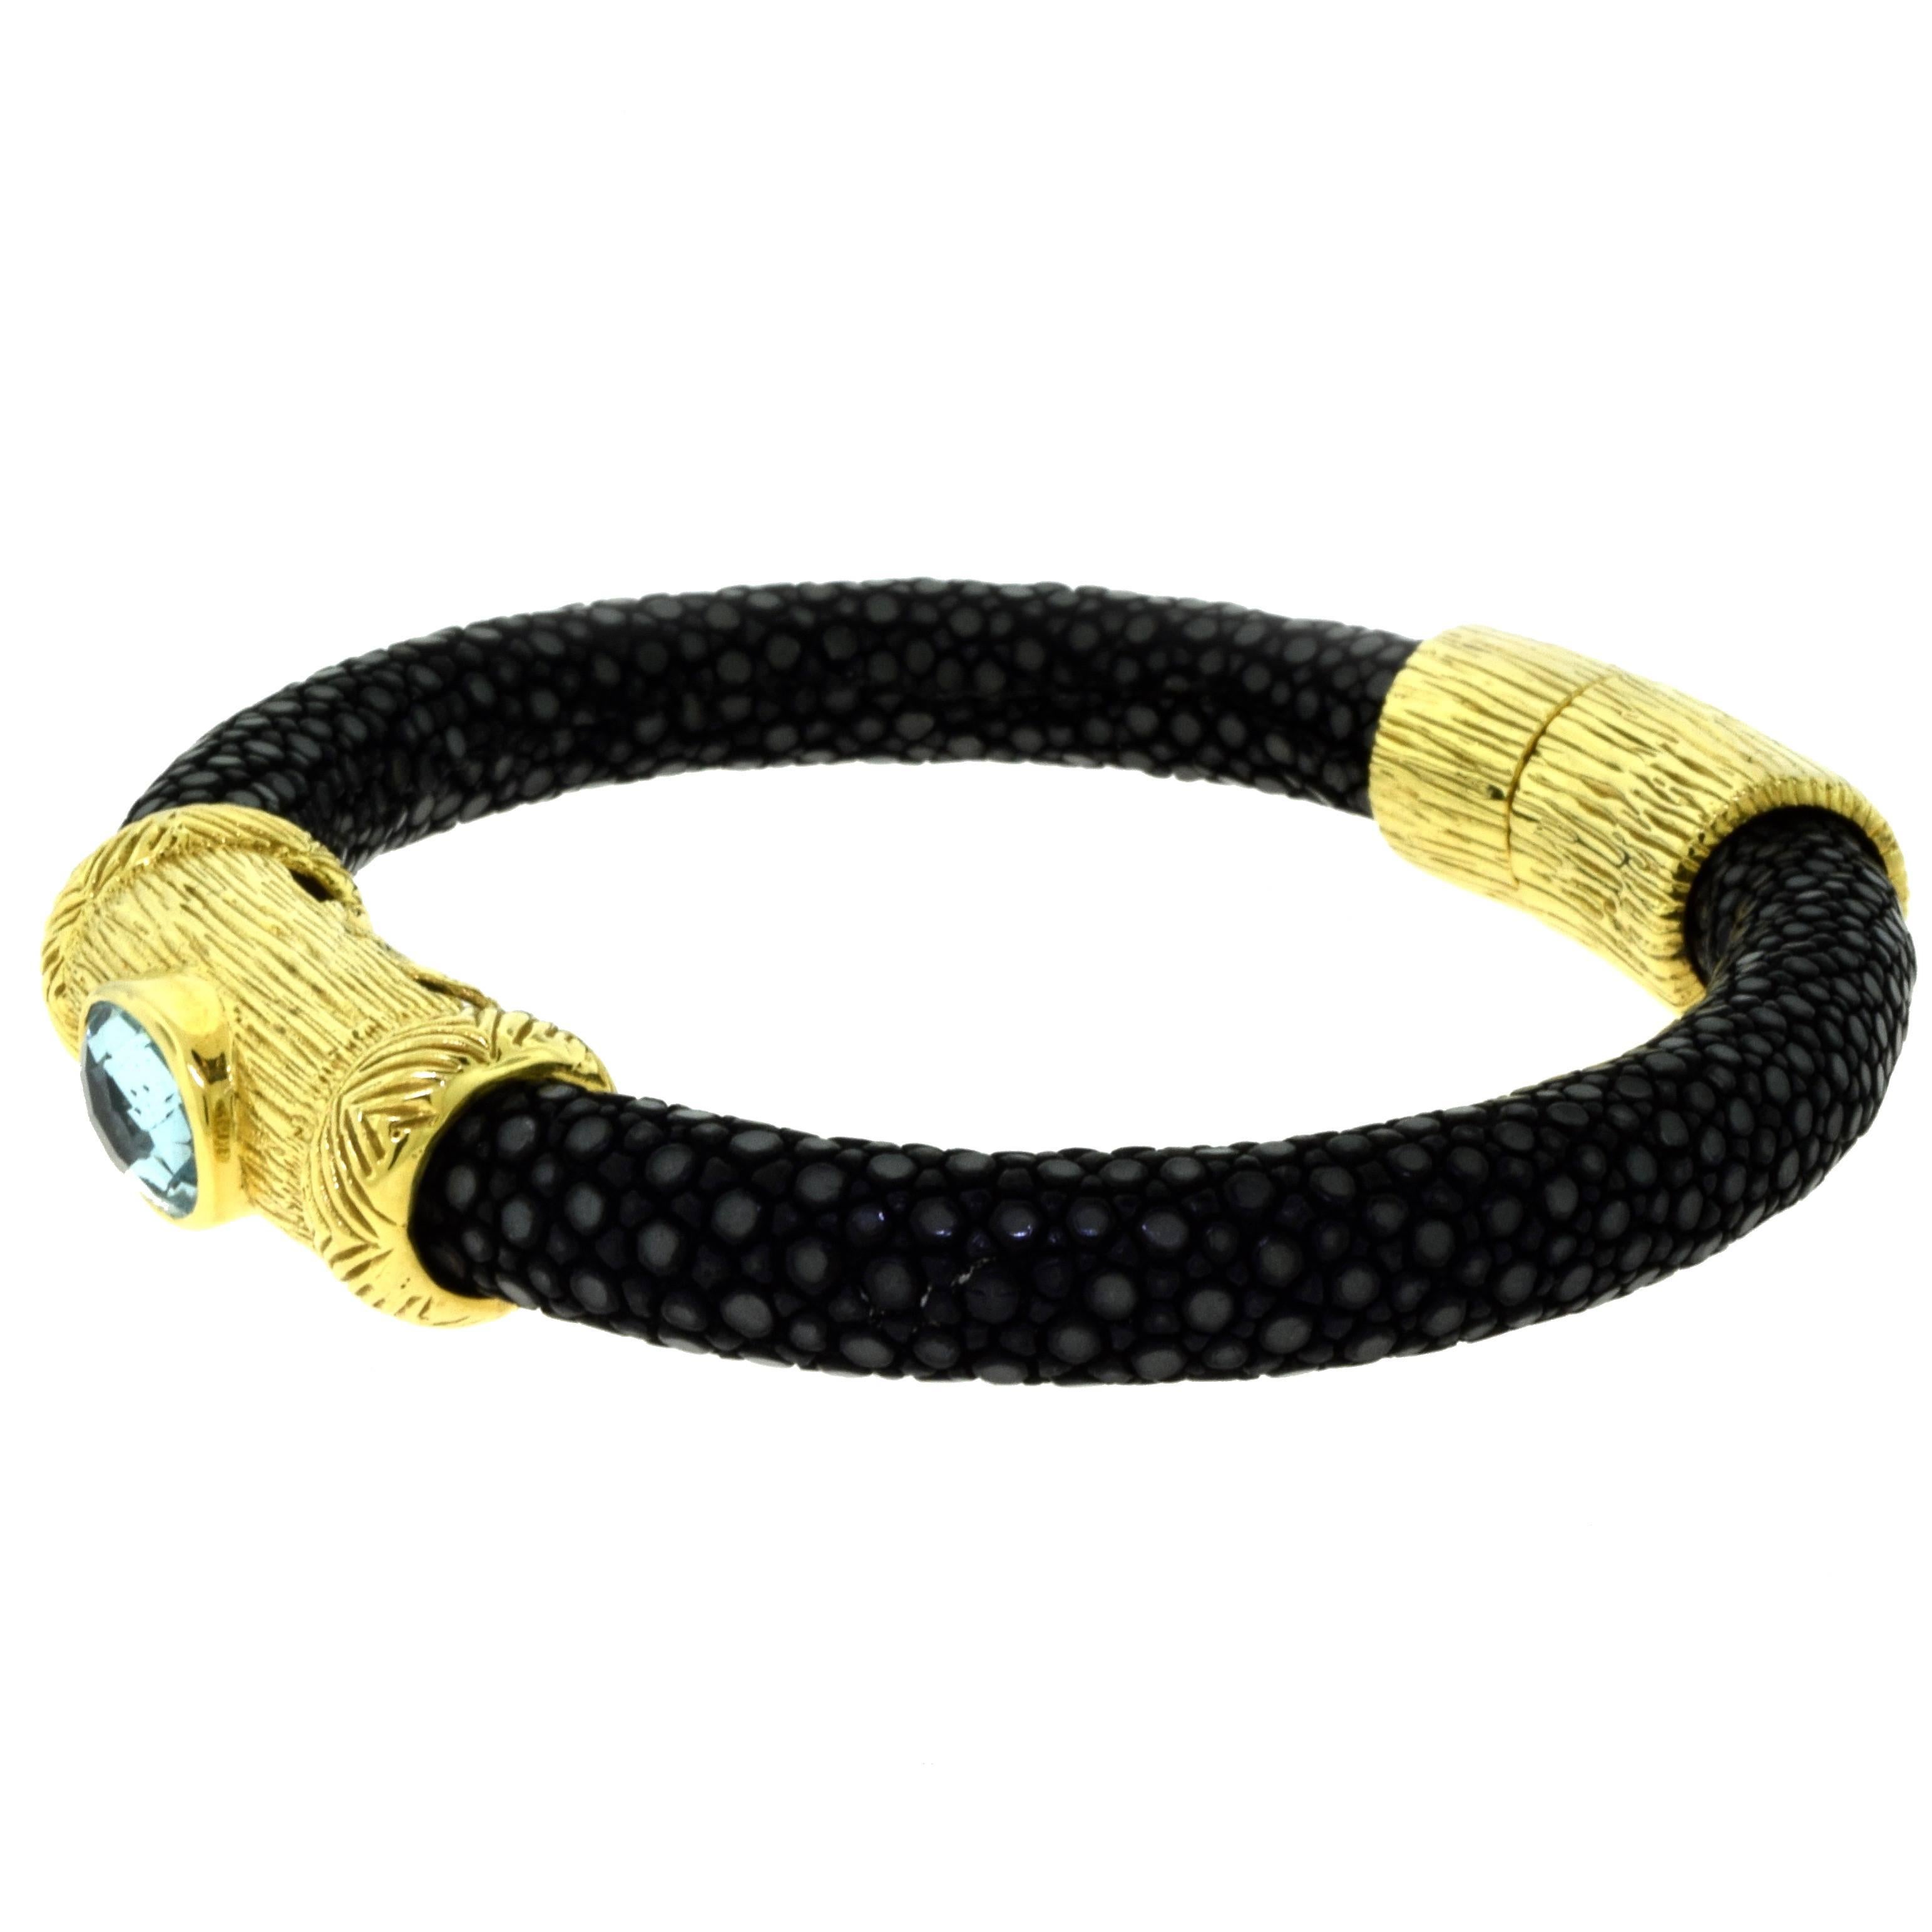 Designer: NINI
Non-Metal Material: Black Snake Skin
Metal: 18 Karat Yellow Gold
Stone: Blue Topaz Oval Stone
Halmark: NINI 18K
Total Item Weight (g): 52
2.75 inches wide
Collateral: Statement of Sale